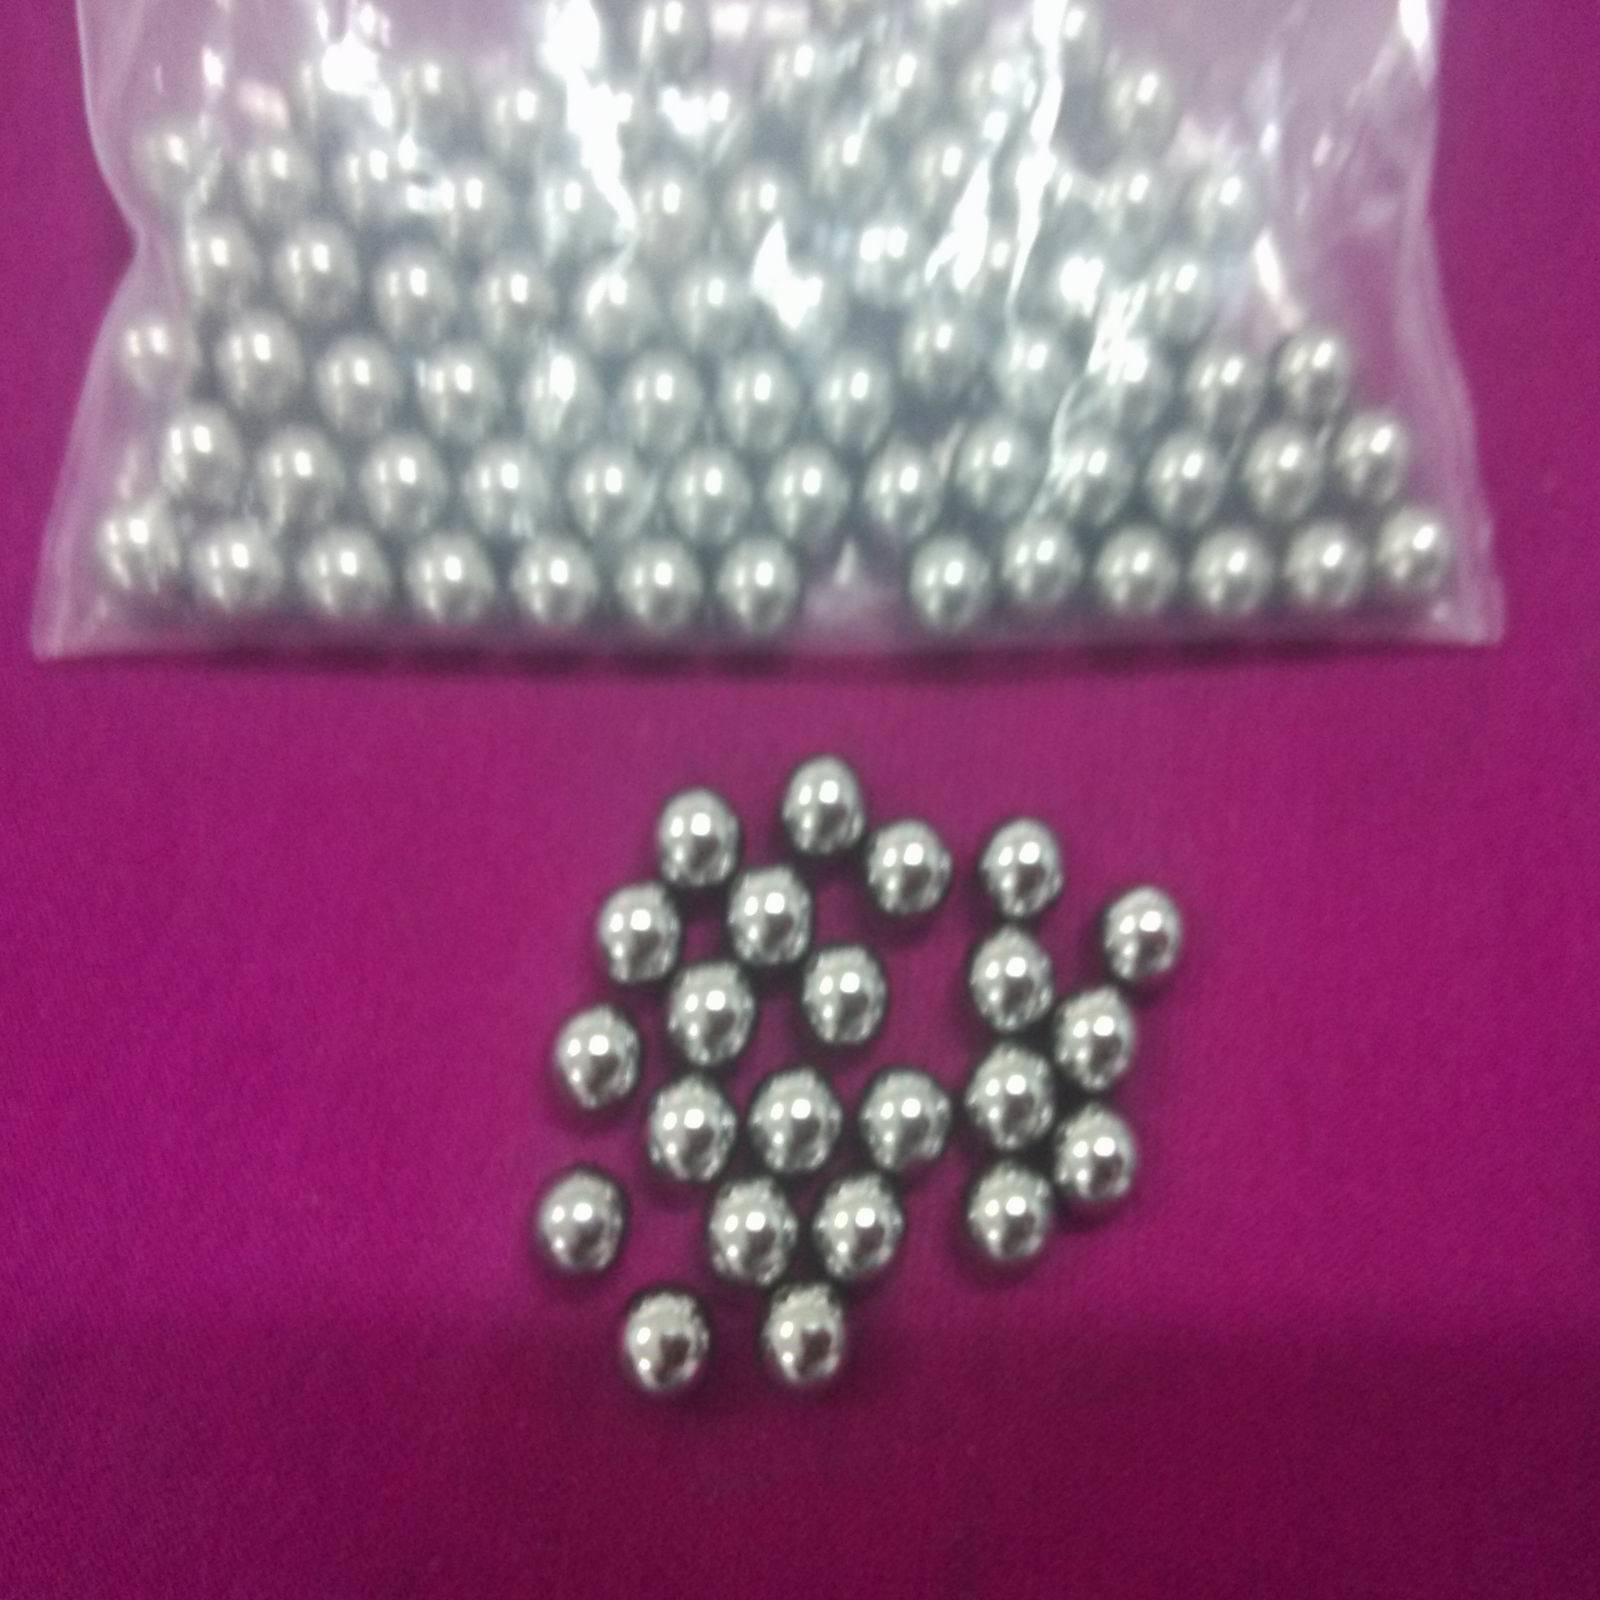 Polished Ball of Tungsten Carbide in Plastic Bag